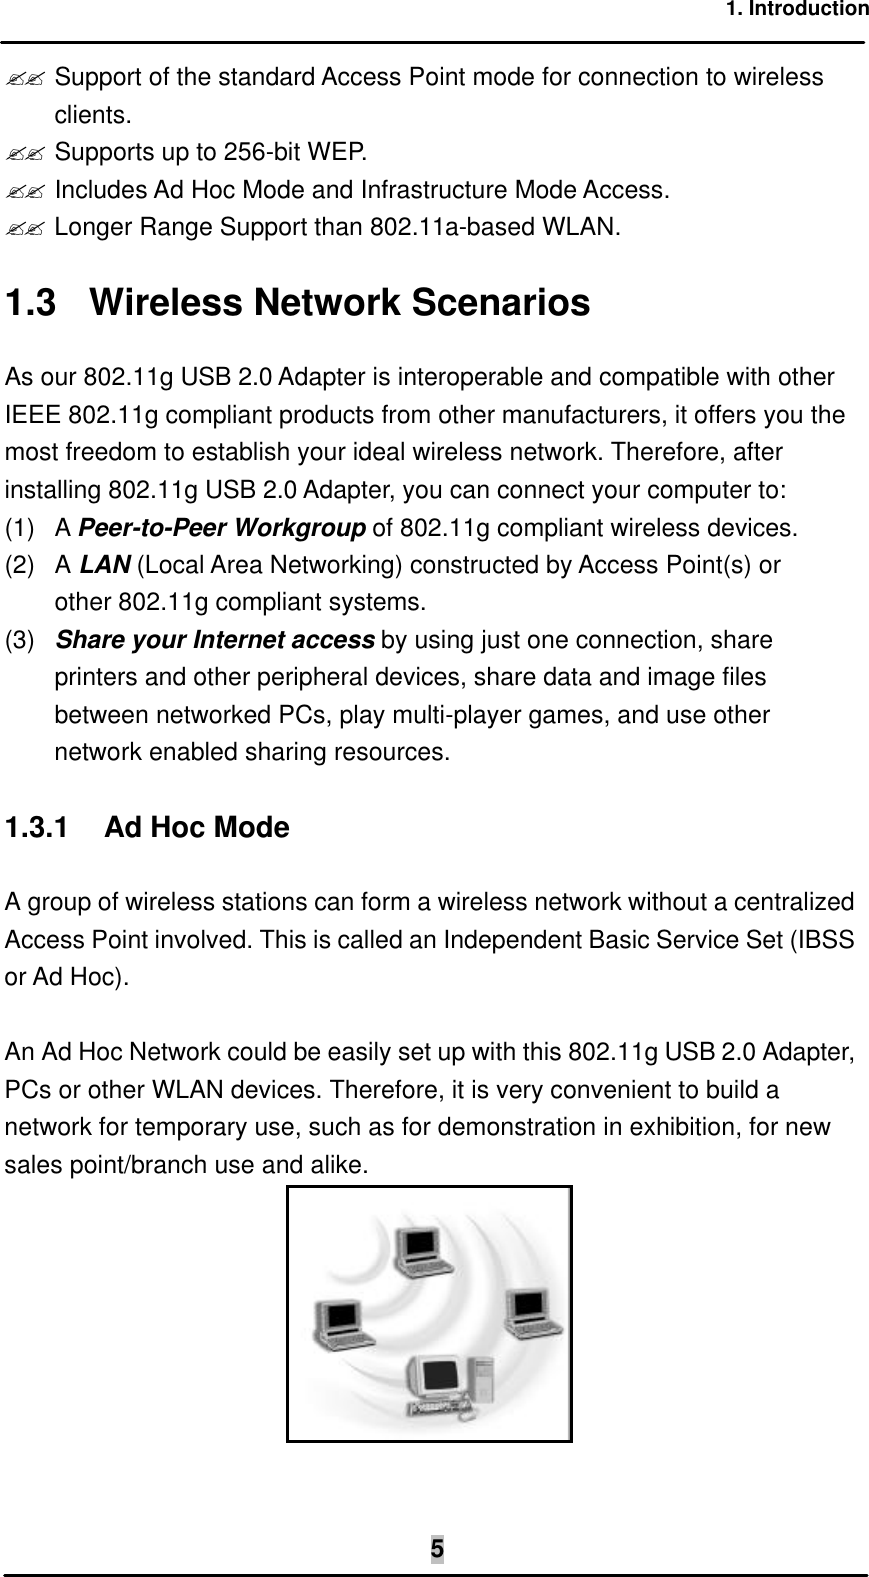 1. Introduction  5?? Support of the standard Access Point mode for connection to wireless clients. ?? Supports up to 256-bit WEP. ?? Includes Ad Hoc Mode and Infrastructure Mode Access. ?? Longer Range Support than 802.11a-based WLAN. 1.3 Wireless Network Scenarios As our 802.11g USB 2.0 Adapter is interoperable and compatible with other IEEE 802.11g compliant products from other manufacturers, it offers you the most freedom to establish your ideal wireless network. Therefore, after installing 802.11g USB 2.0 Adapter, you can connect your computer to: (1) A Peer-to-Peer Workgroup of 802.11g compliant wireless devices. (2) A LAN (Local Area Networking) constructed by Access Point(s) or other 802.11g compliant systems. (3) Share your Internet access by using just one connection, share printers and other peripheral devices, share data and image files between networked PCs, play multi-player games, and use other network enabled sharing resources. 1.3.1  Ad Hoc Mode A group of wireless stations can form a wireless network without a centralized Access Point involved. This is called an Independent Basic Service Set (IBSS or Ad Hoc).  An Ad Hoc Network could be easily set up with this 802.11g USB 2.0 Adapter, PCs or other WLAN devices. Therefore, it is very convenient to build a network for temporary use, such as for demonstration in exhibition, for new sales point/branch use and alike.  